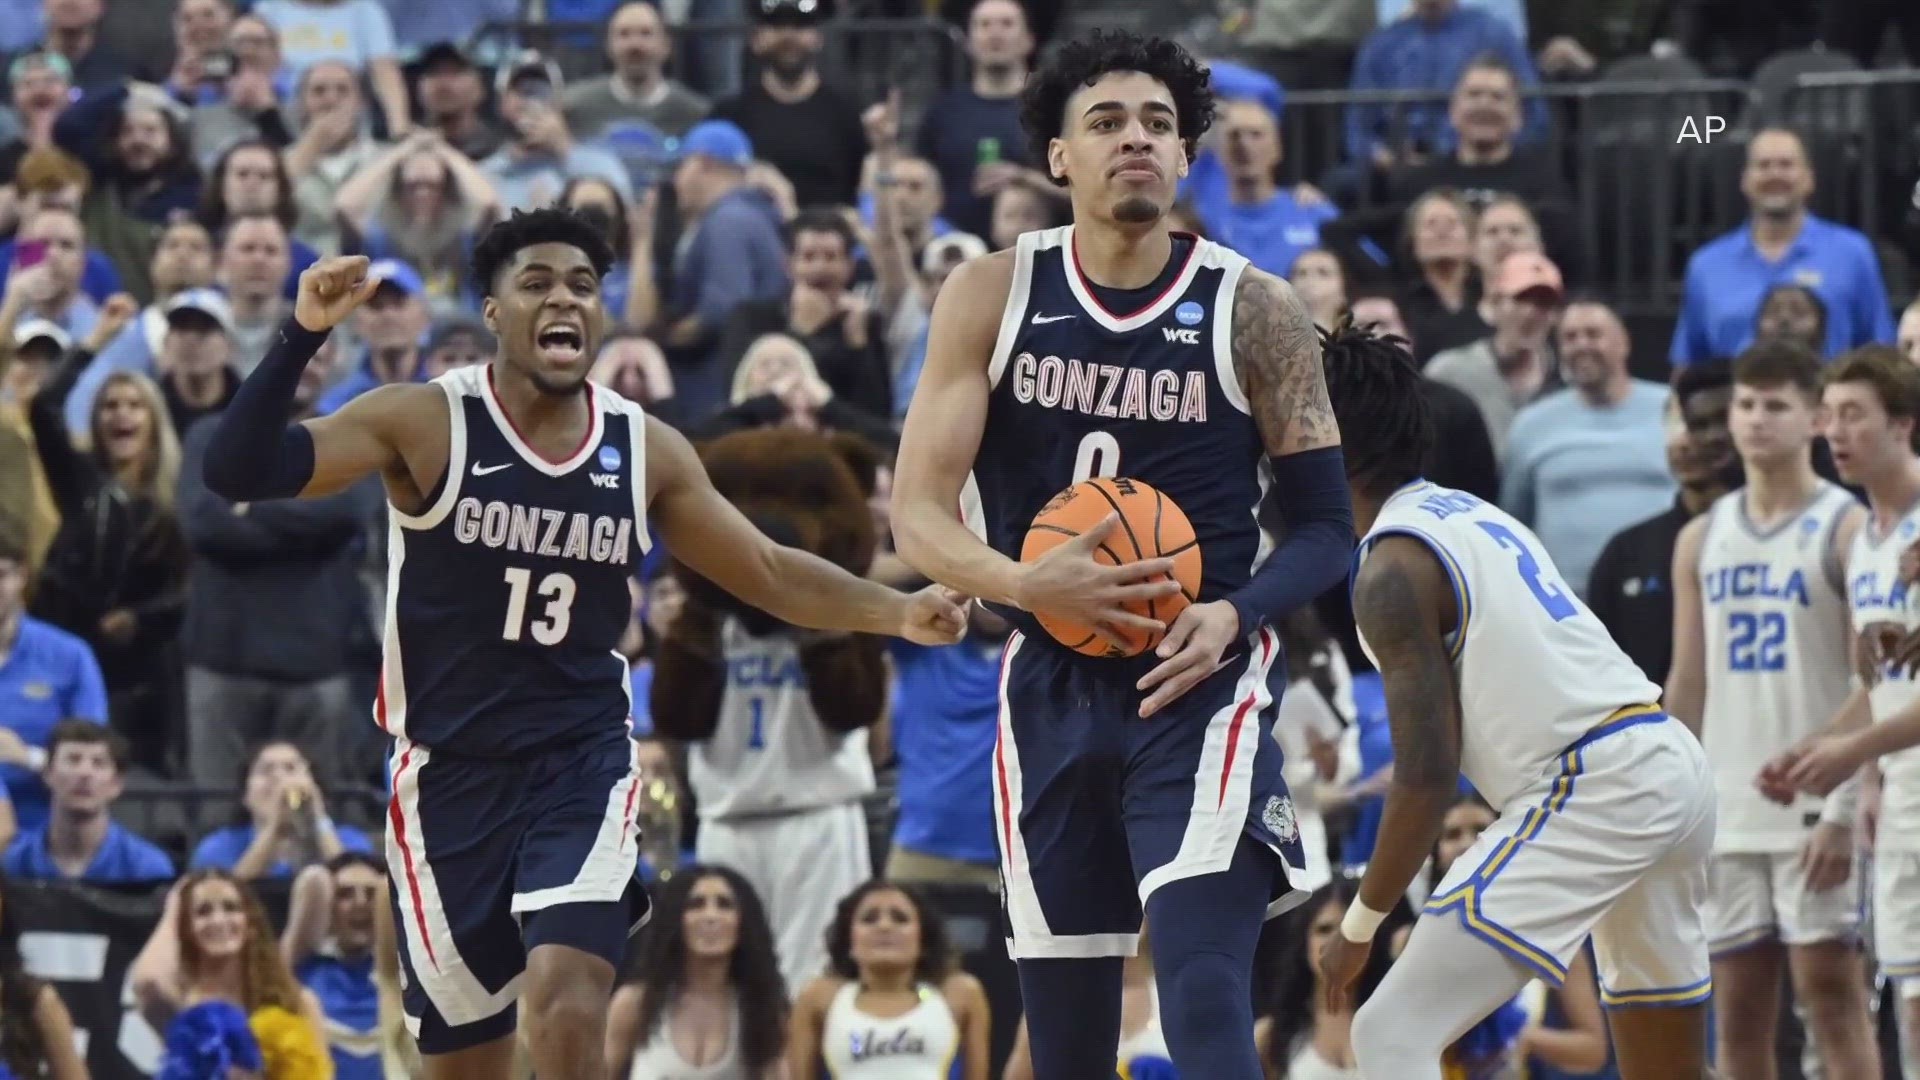 KREM 2's Travis Green breaks down what viewers can expect ahead of Gonzaga's Elite 8 matchup against UConn.